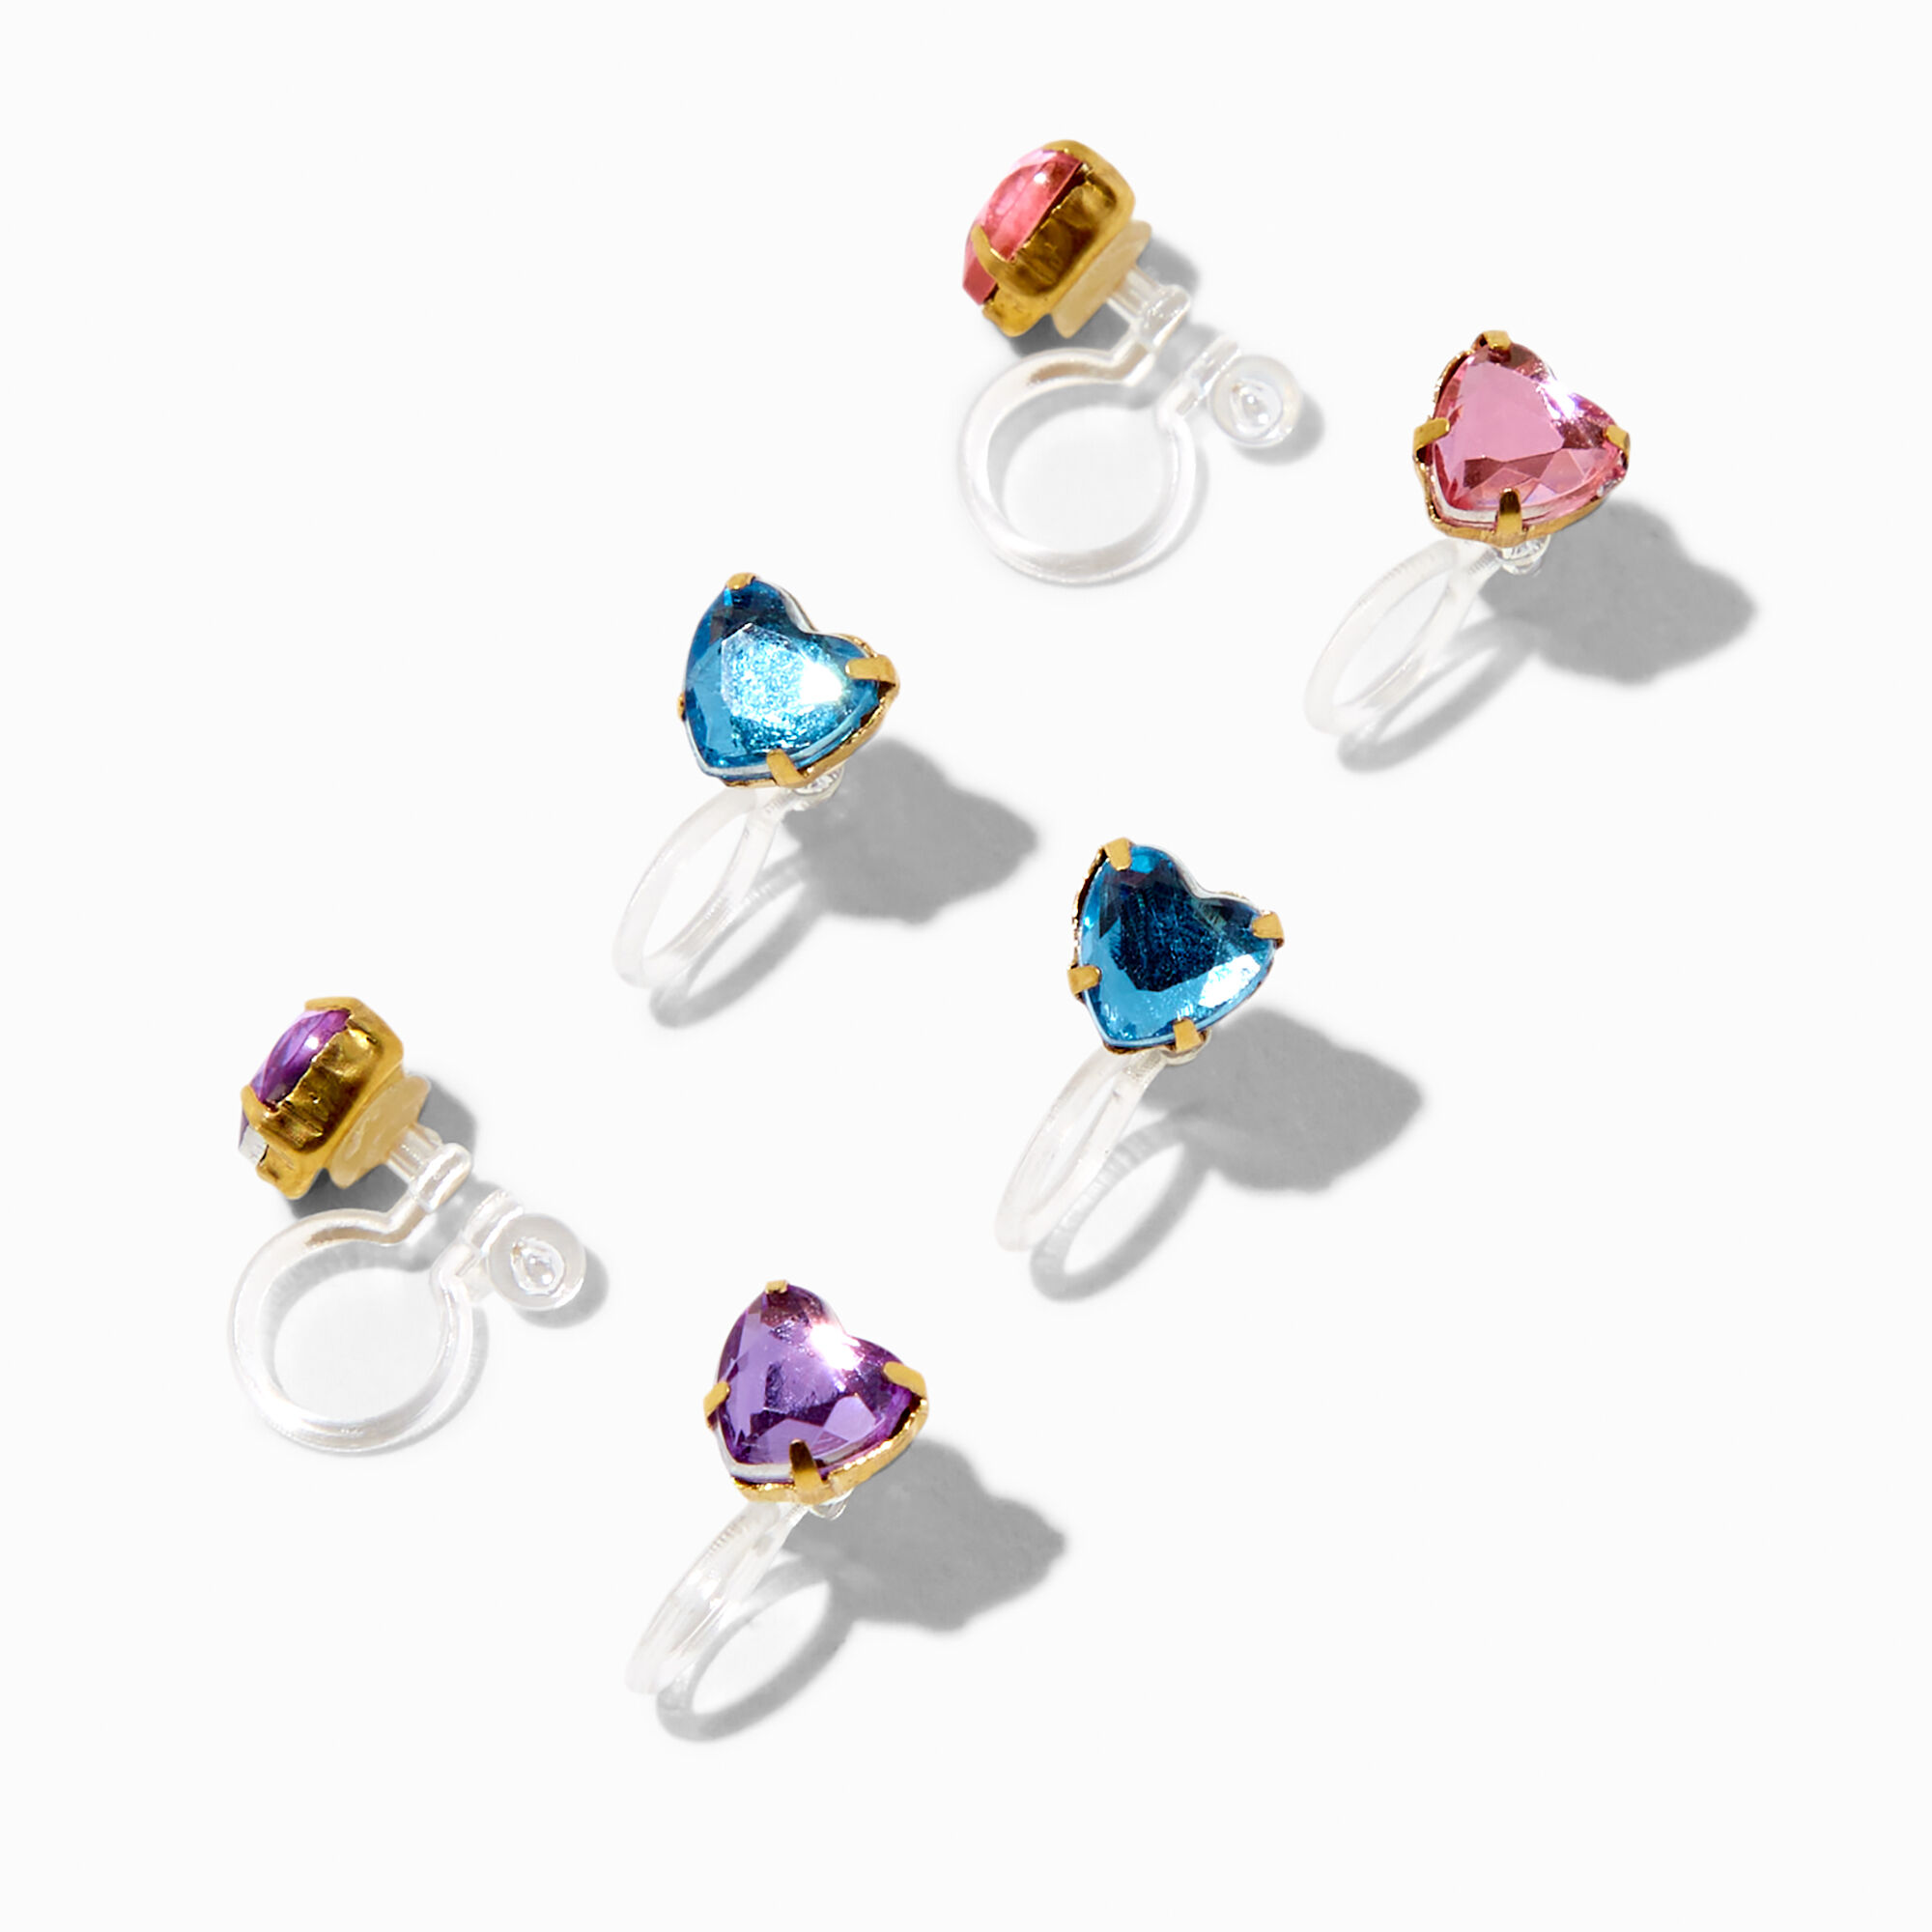 View Claires Club Jewel Hearts Clip On Earrings 3 Pack information